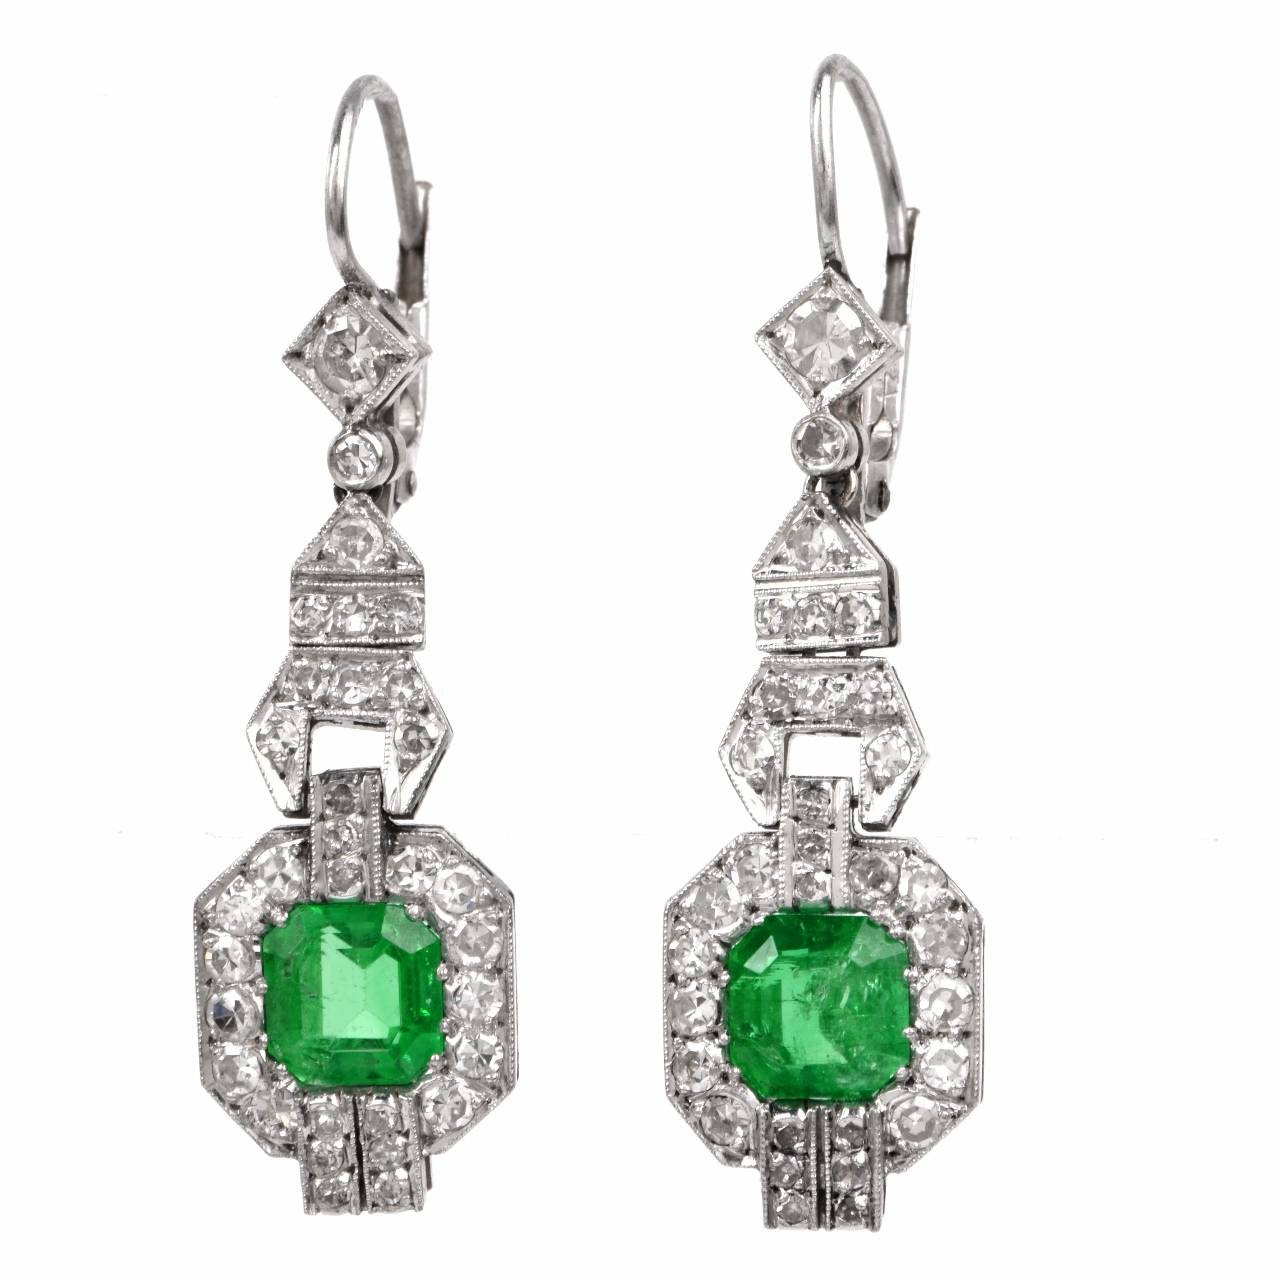 These alluringly beautiful Art Deco earrings of unmatched refinement and aesthetic appeal are crafted in solid platinum and weigh approx. 5.8 grams. Quintessentially Art Deco in their geometric features, these graceful earrings are composed of